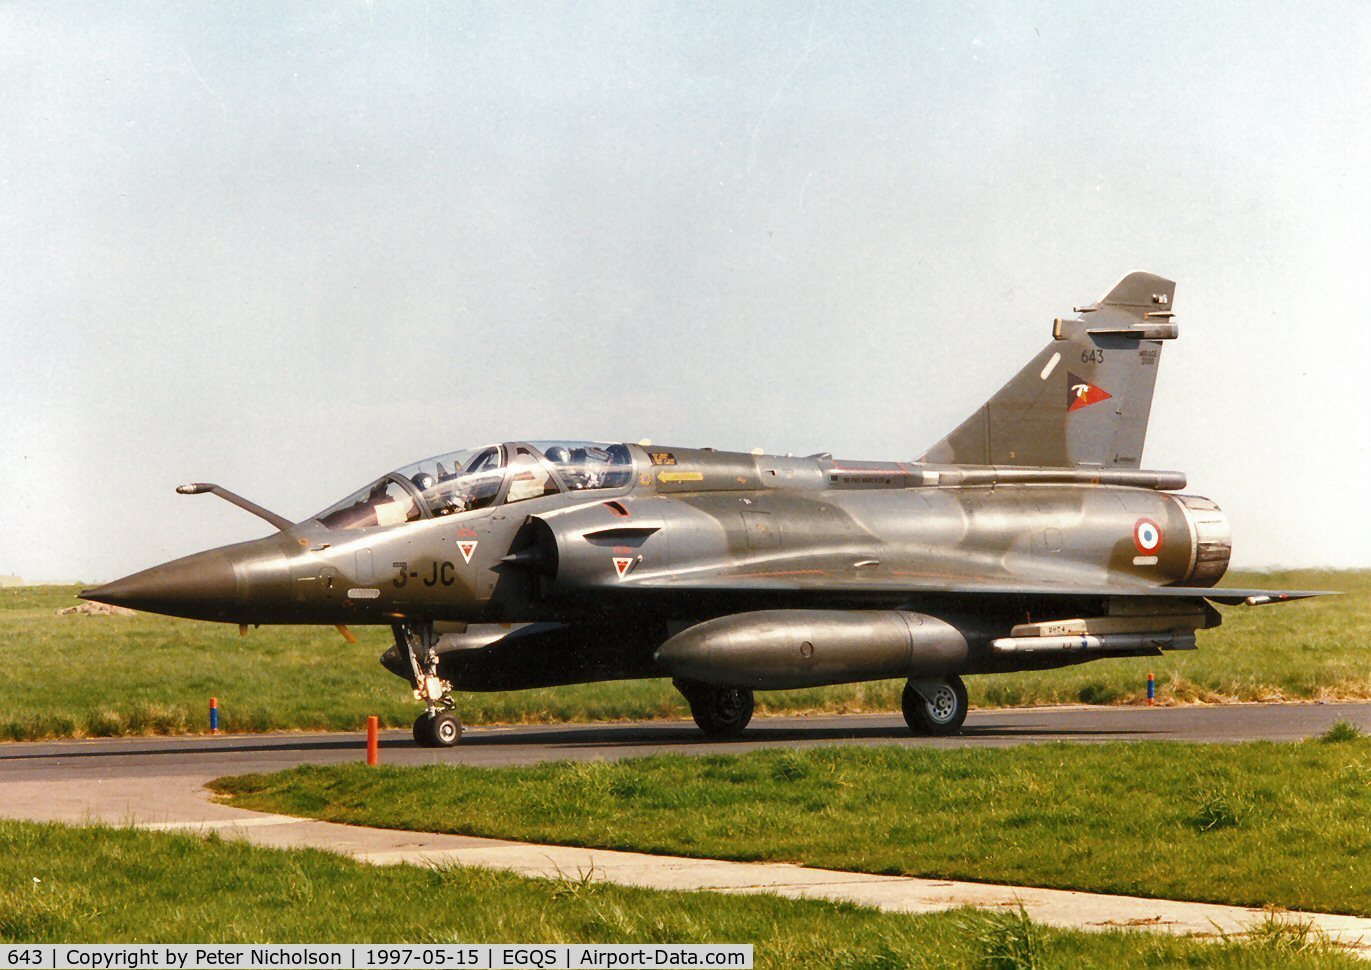 643, Dassault Mirage 2000D C/N 643, Mirage 2000D, callsign French Air Force 7320 Alpha, of EC 02.003 taxying to the active runway at Lossiemouth in May 1997.